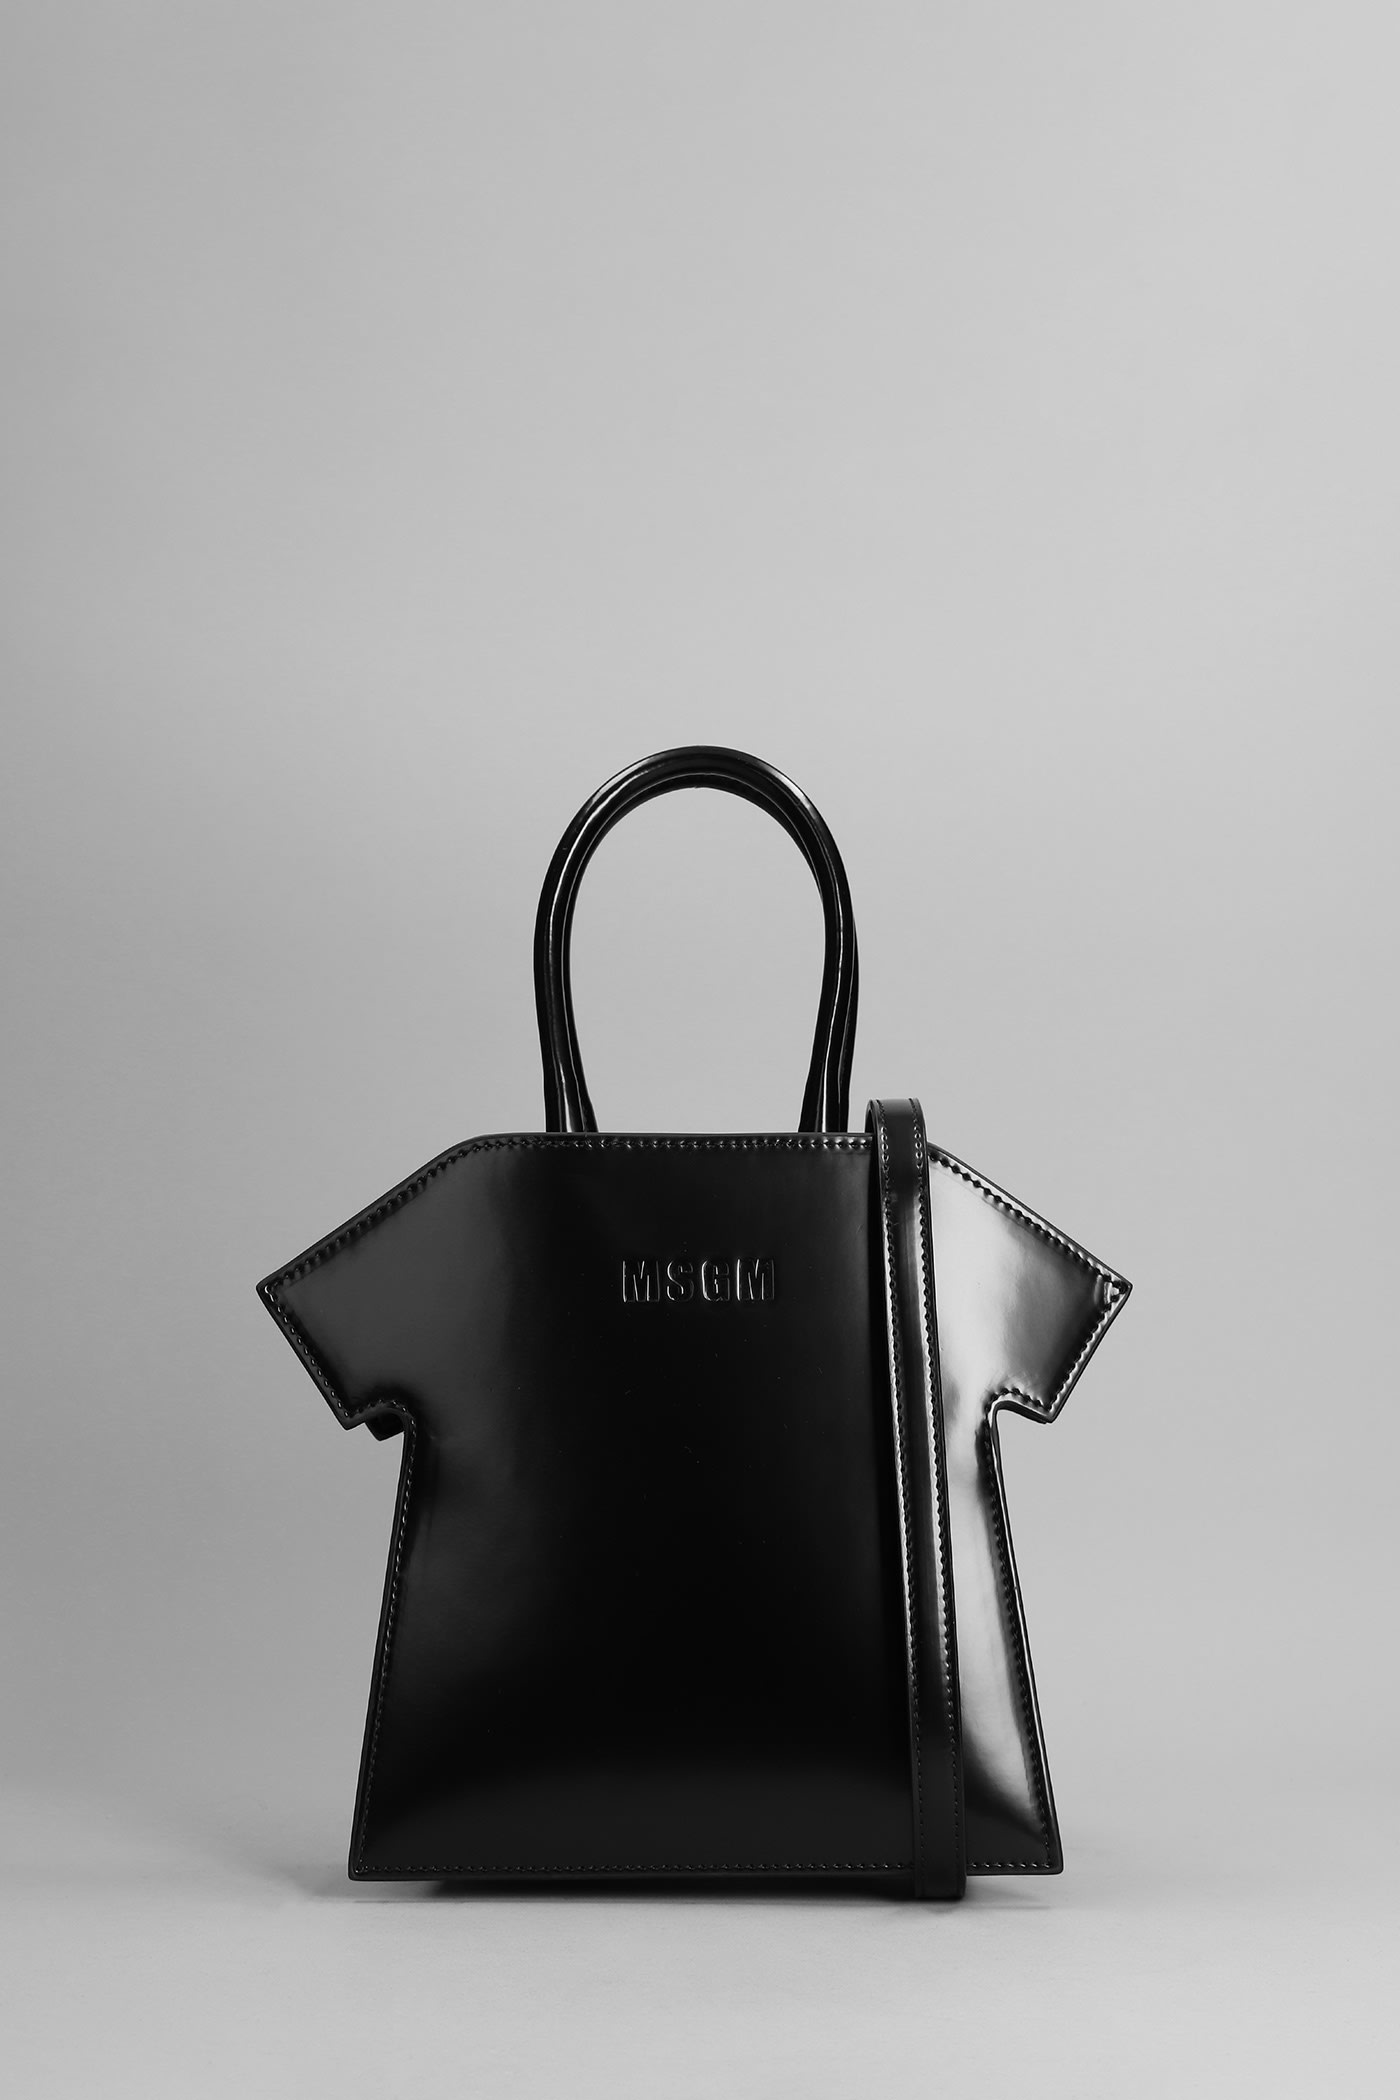 MSGM Hand Bag In Black Polyester